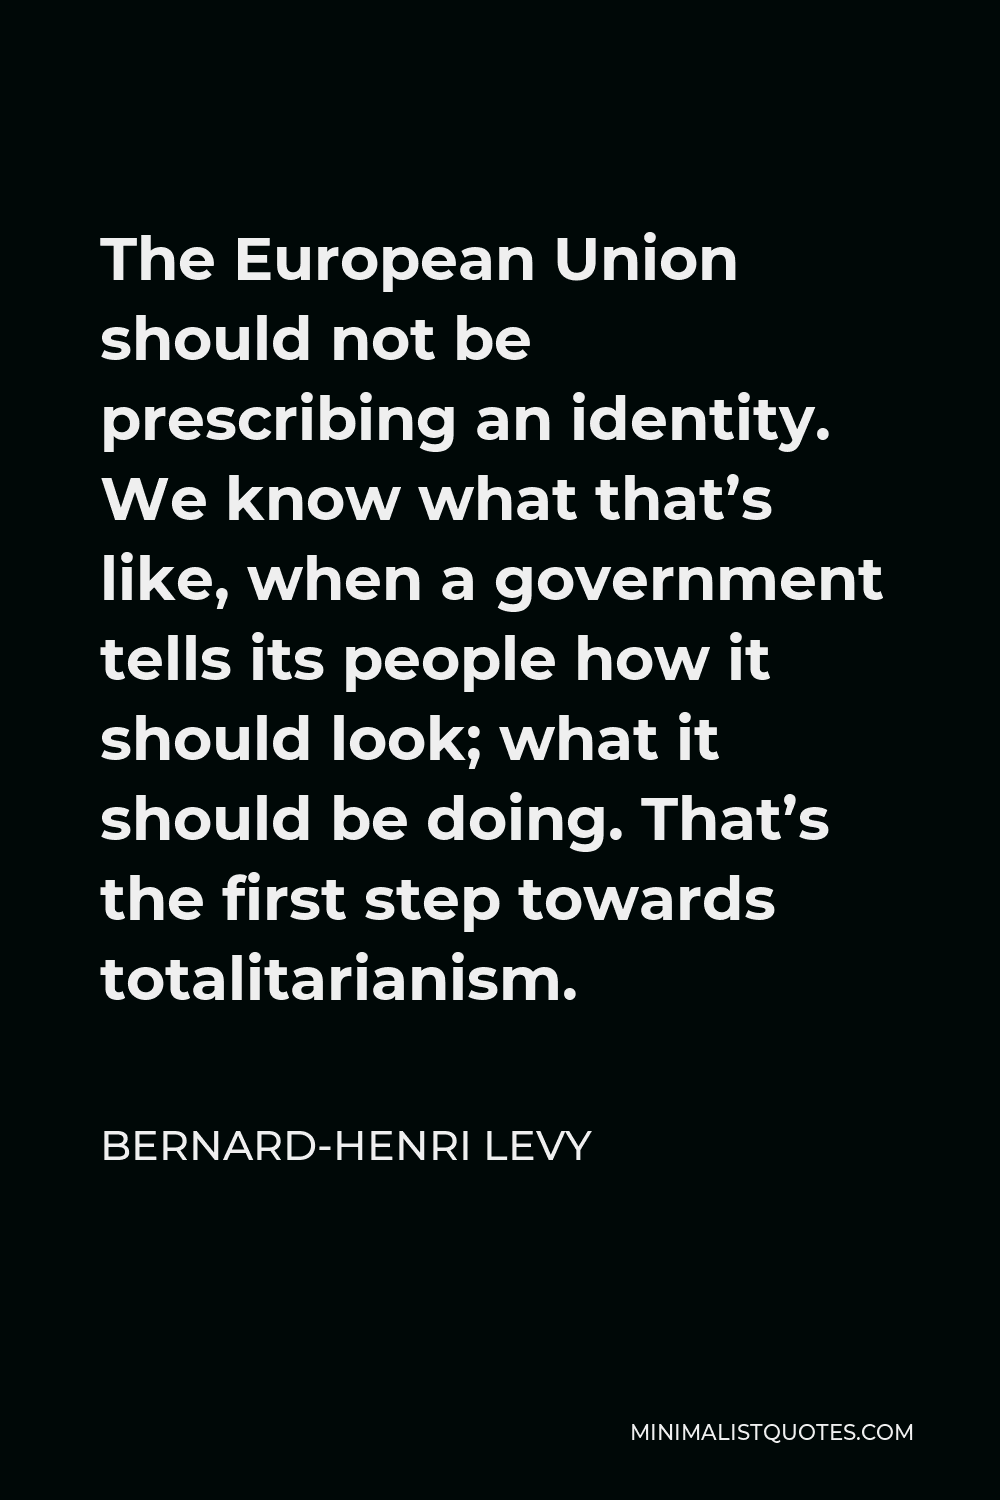 Bernard-Henri Levy Quote - The European Union should not be prescribing an identity. We know what that’s like, when a government tells its people how it should look; what it should be doing. That’s the first step towards totalitarianism.